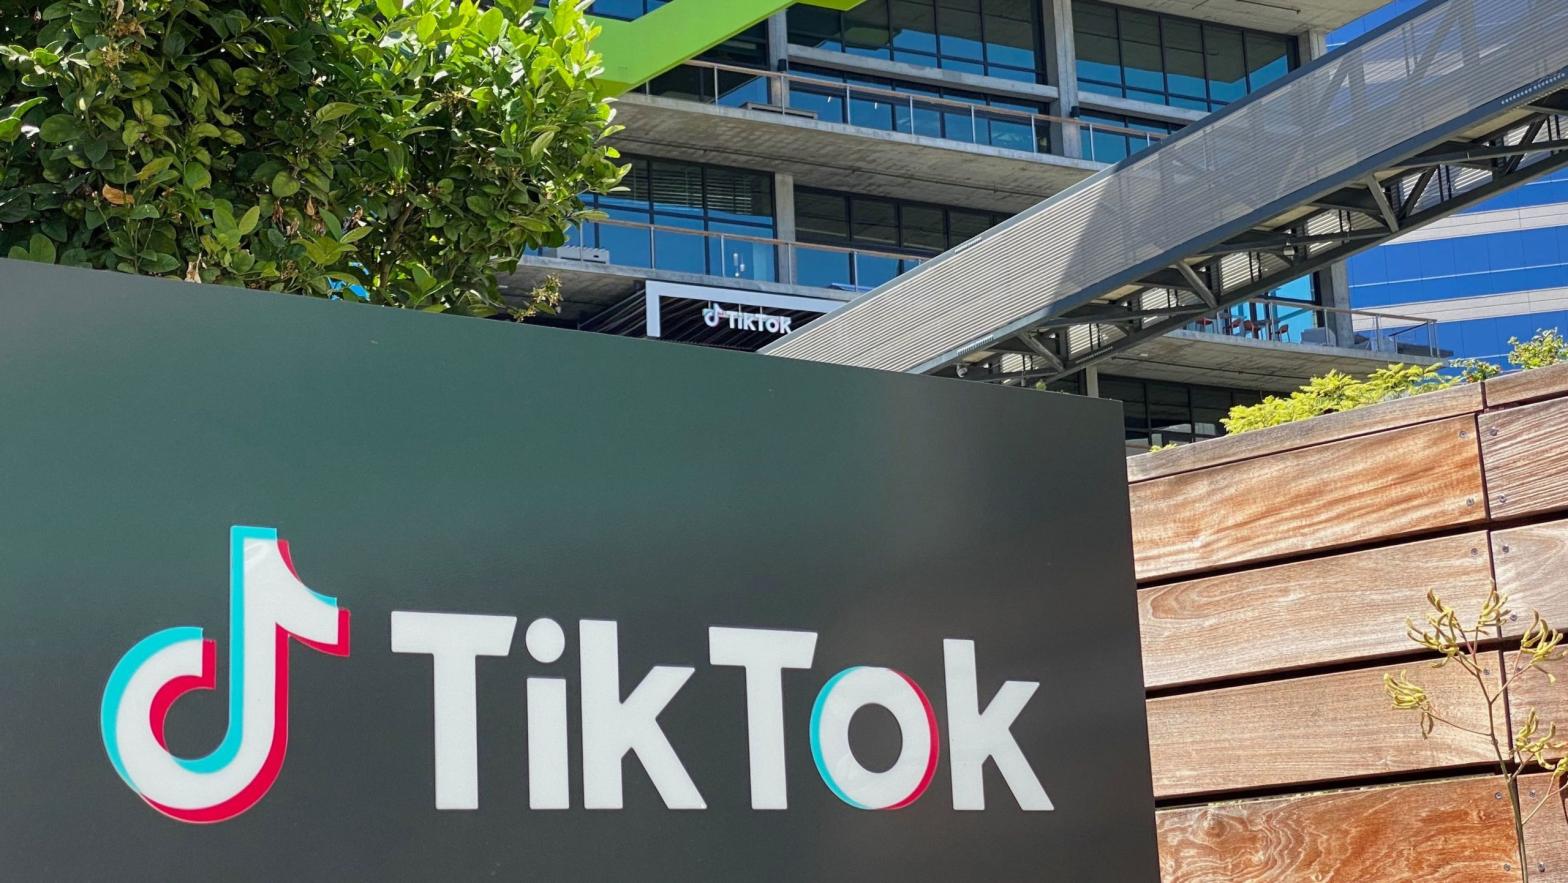 TikTok offices in Los Angeles, August 2020. (Photo: Chris Delmas, Getty Images)